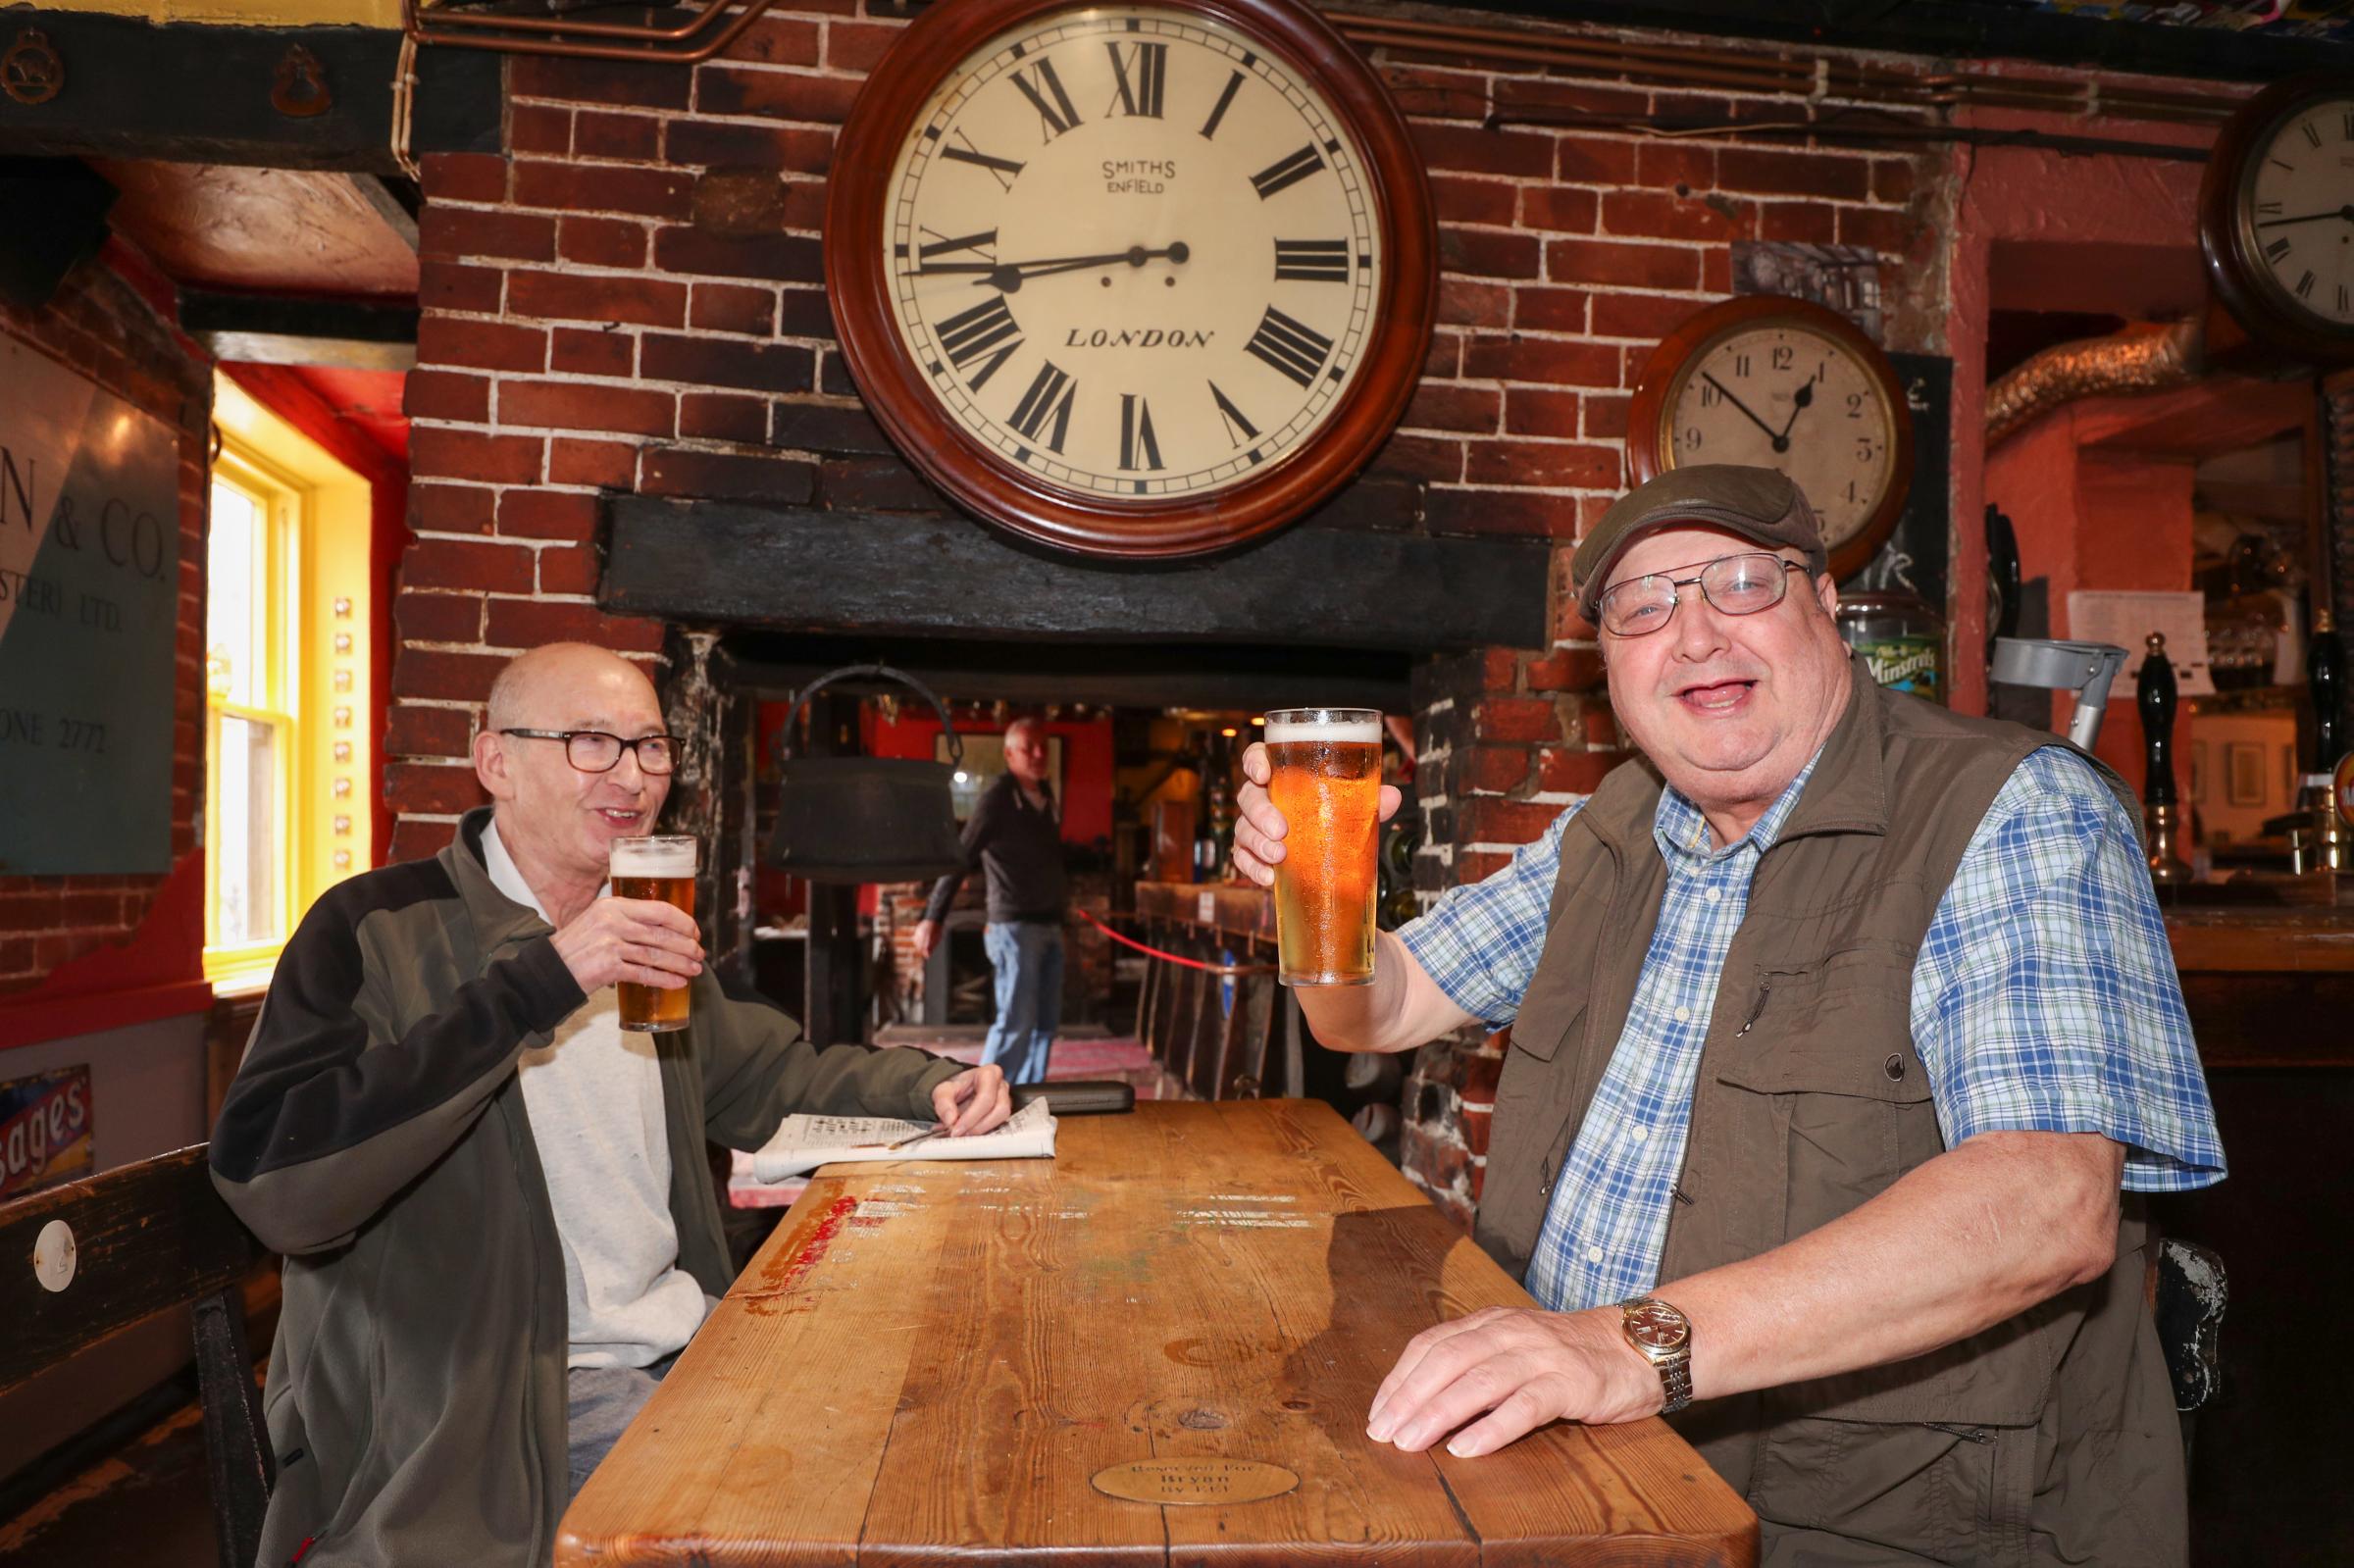 Pub and cafes reopen in Winchester after coronavirus restrictions were relaxed on Saturday 4th July. Patrick Broomfield and Mike Glass enjoy a pint and a chat in the Black Boy pub..